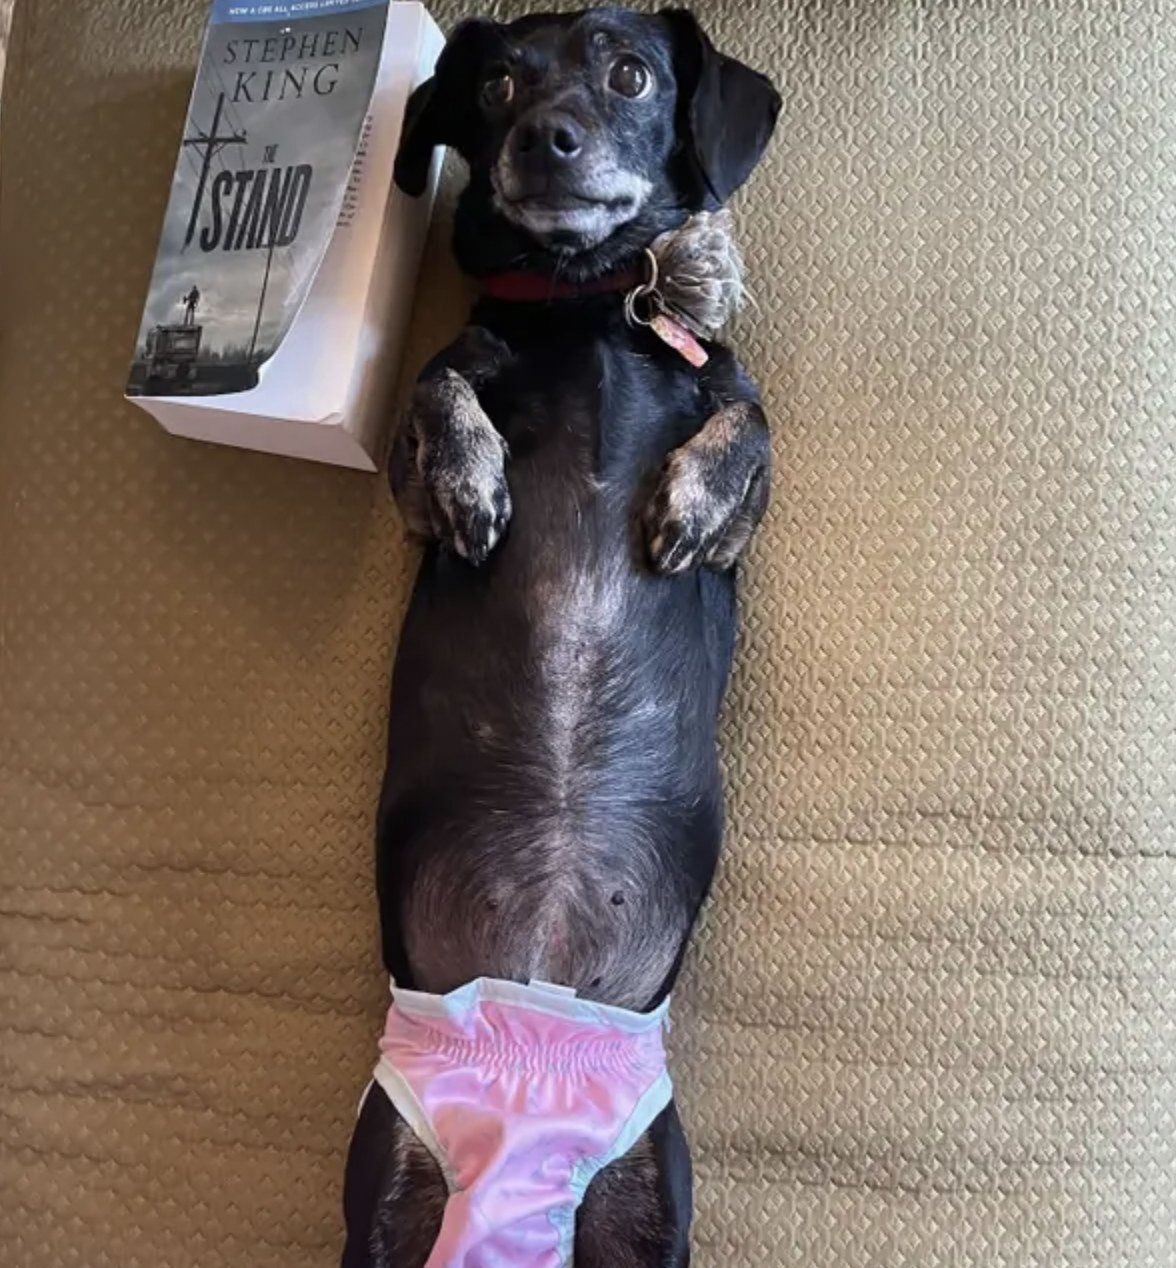 My dog living her best life in her diaper